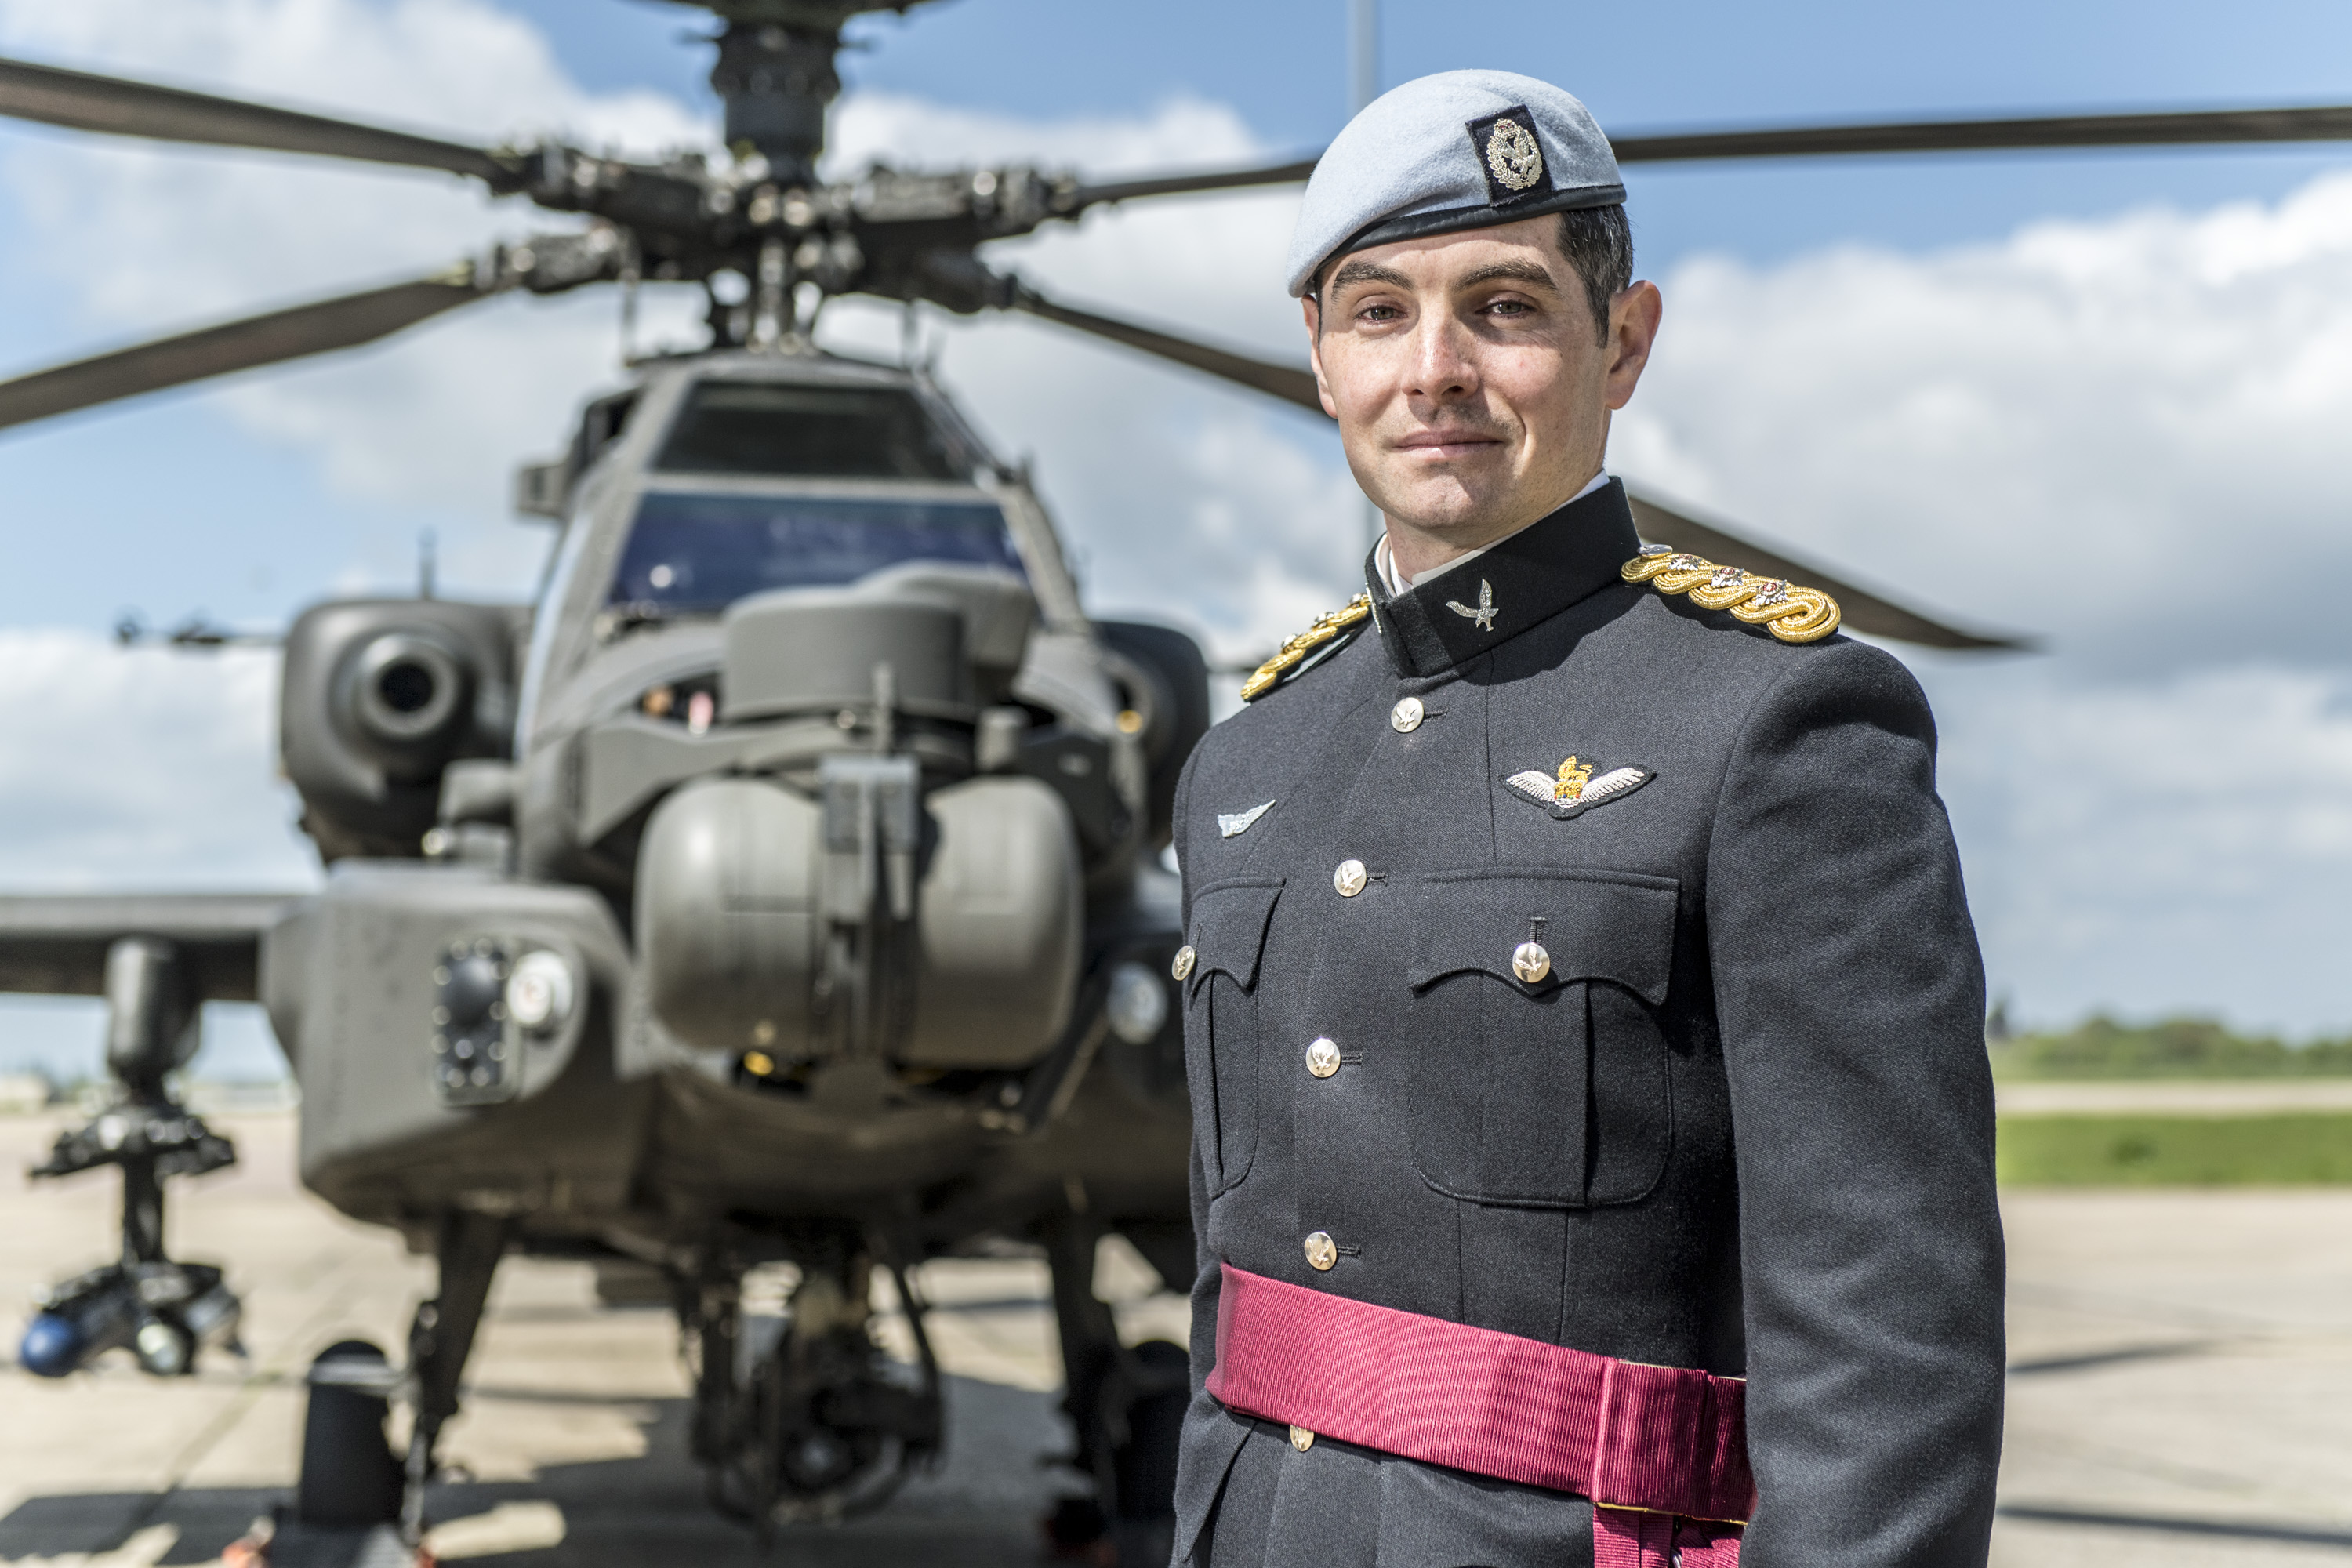 Captain William “Zack” Zehner ’09 stands in front of an Apache helicopter